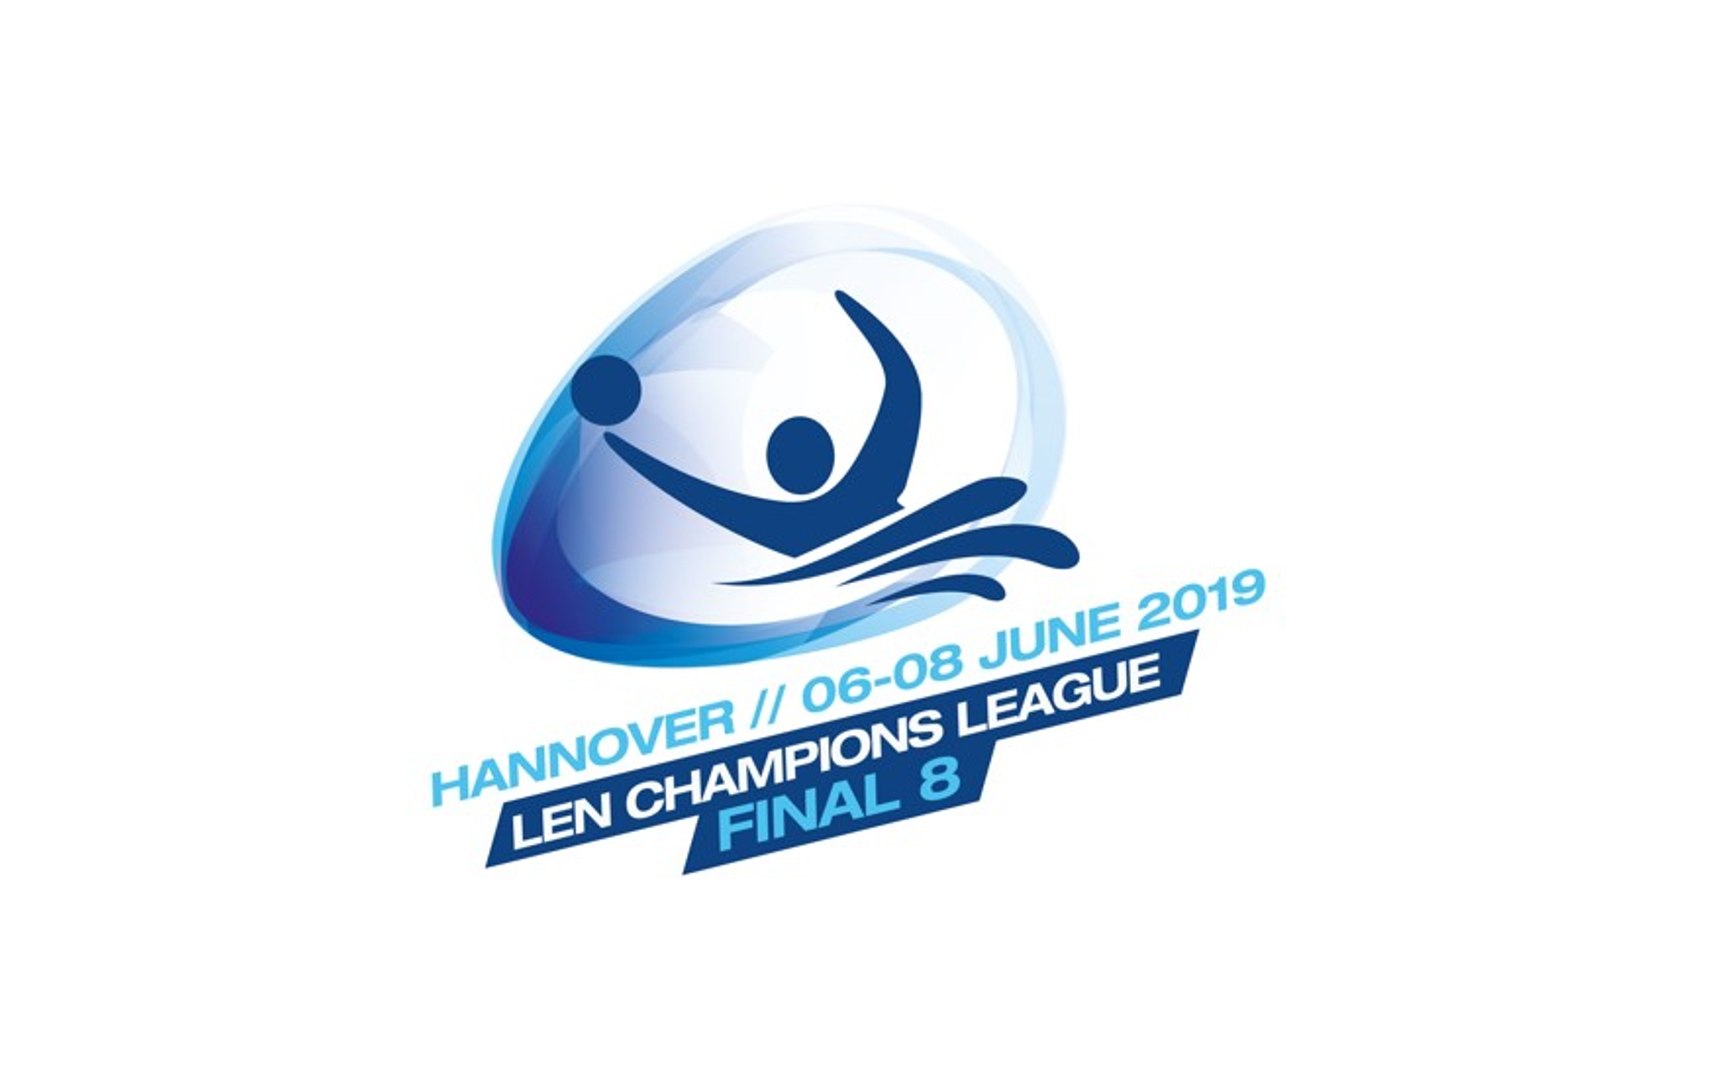 LEN Champions League Final 8 - Hannover 2019 - video Dailymotion